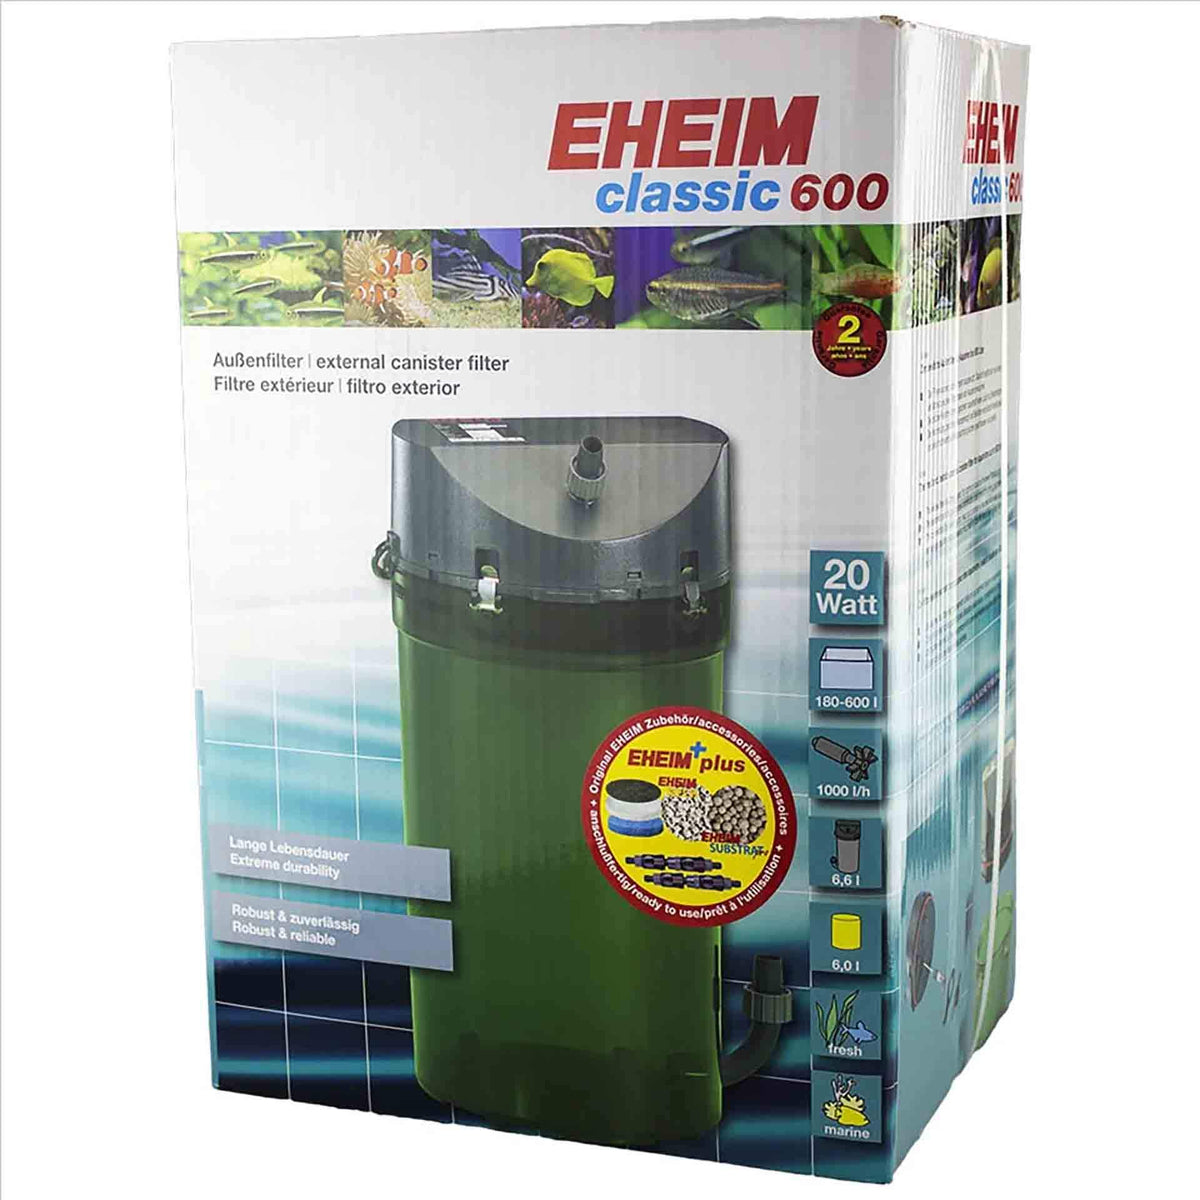 Eheim Classic 600 - 2217 (With Sponge and Bio Media) Canister Filter